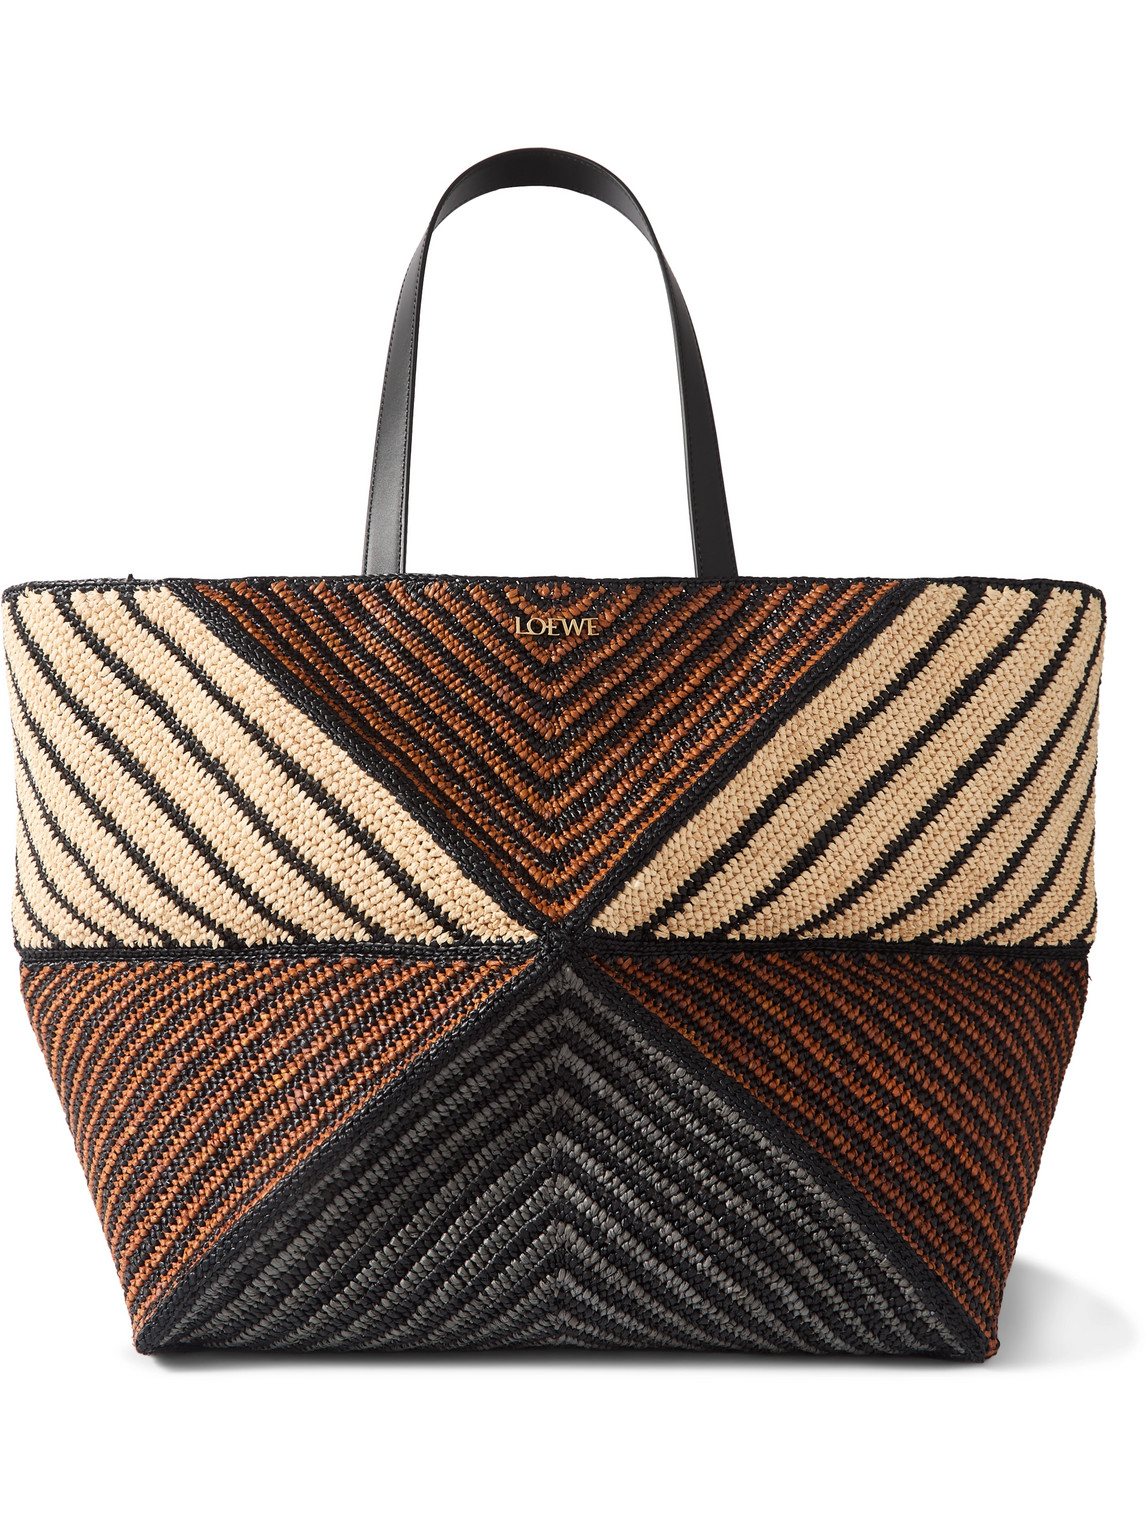 LOEWE PUZZLE FOLD EXTRA-LARGE LEATHER-TRIMMED RAFFIA TOTE BAG